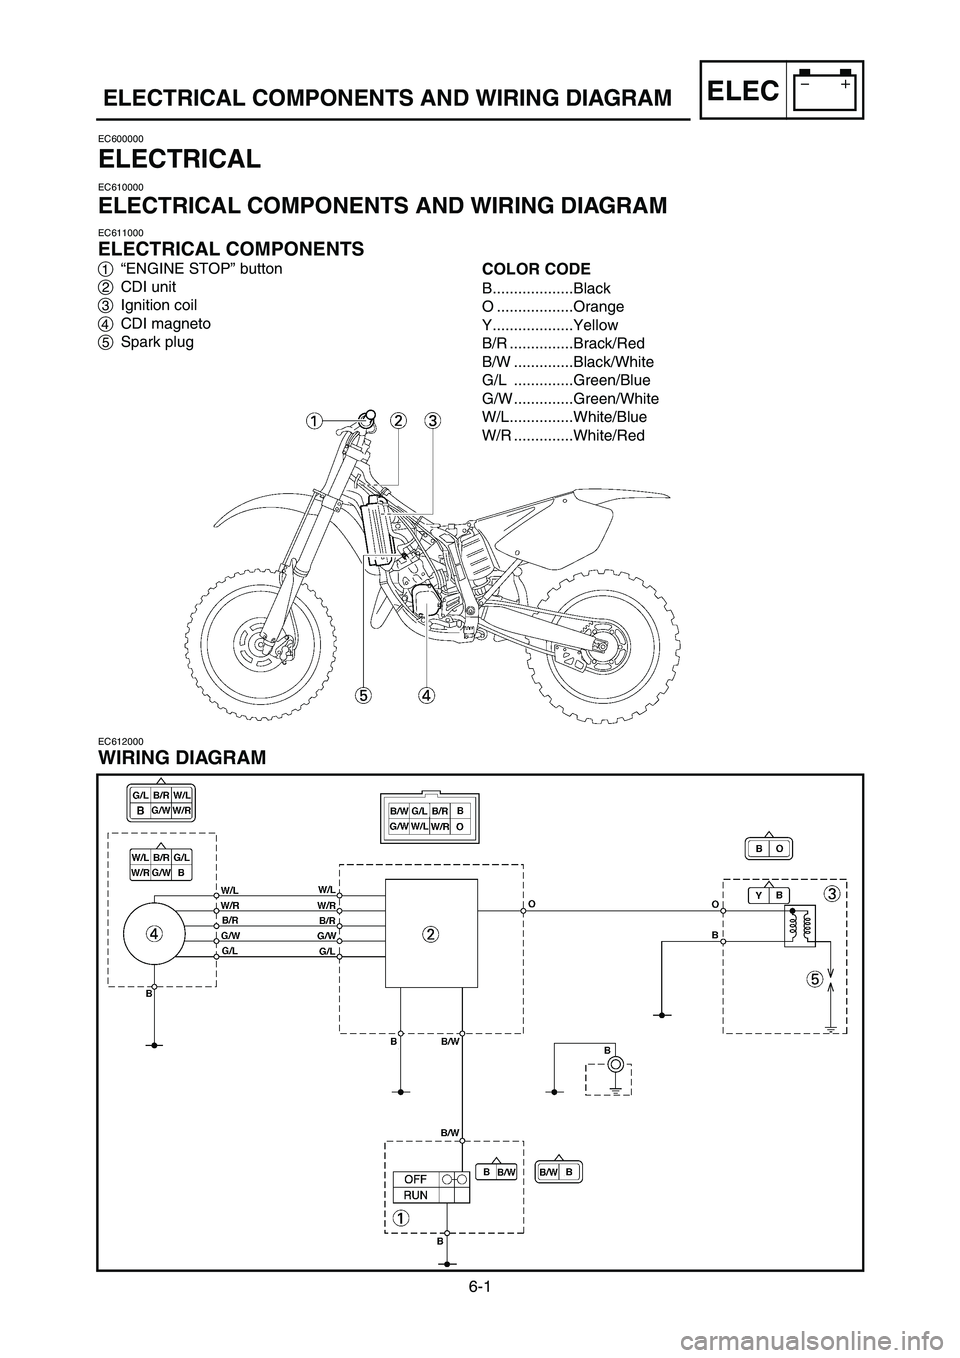 YAMAHA YZ125LC 2007  Betriebsanleitungen (in German) 6-1
ELECELECTRICAL COMPONENTS AND WIRING DIAGRAM
EC600000
ELECTRICAL
EC610000
ELECTRICAL COMPONENTS AND WIRING DIAGRAM
EC611000
ELECTRICAL COMPONENTS
1“ENGINE STOP” button
2CDI unit
3Ignition coil